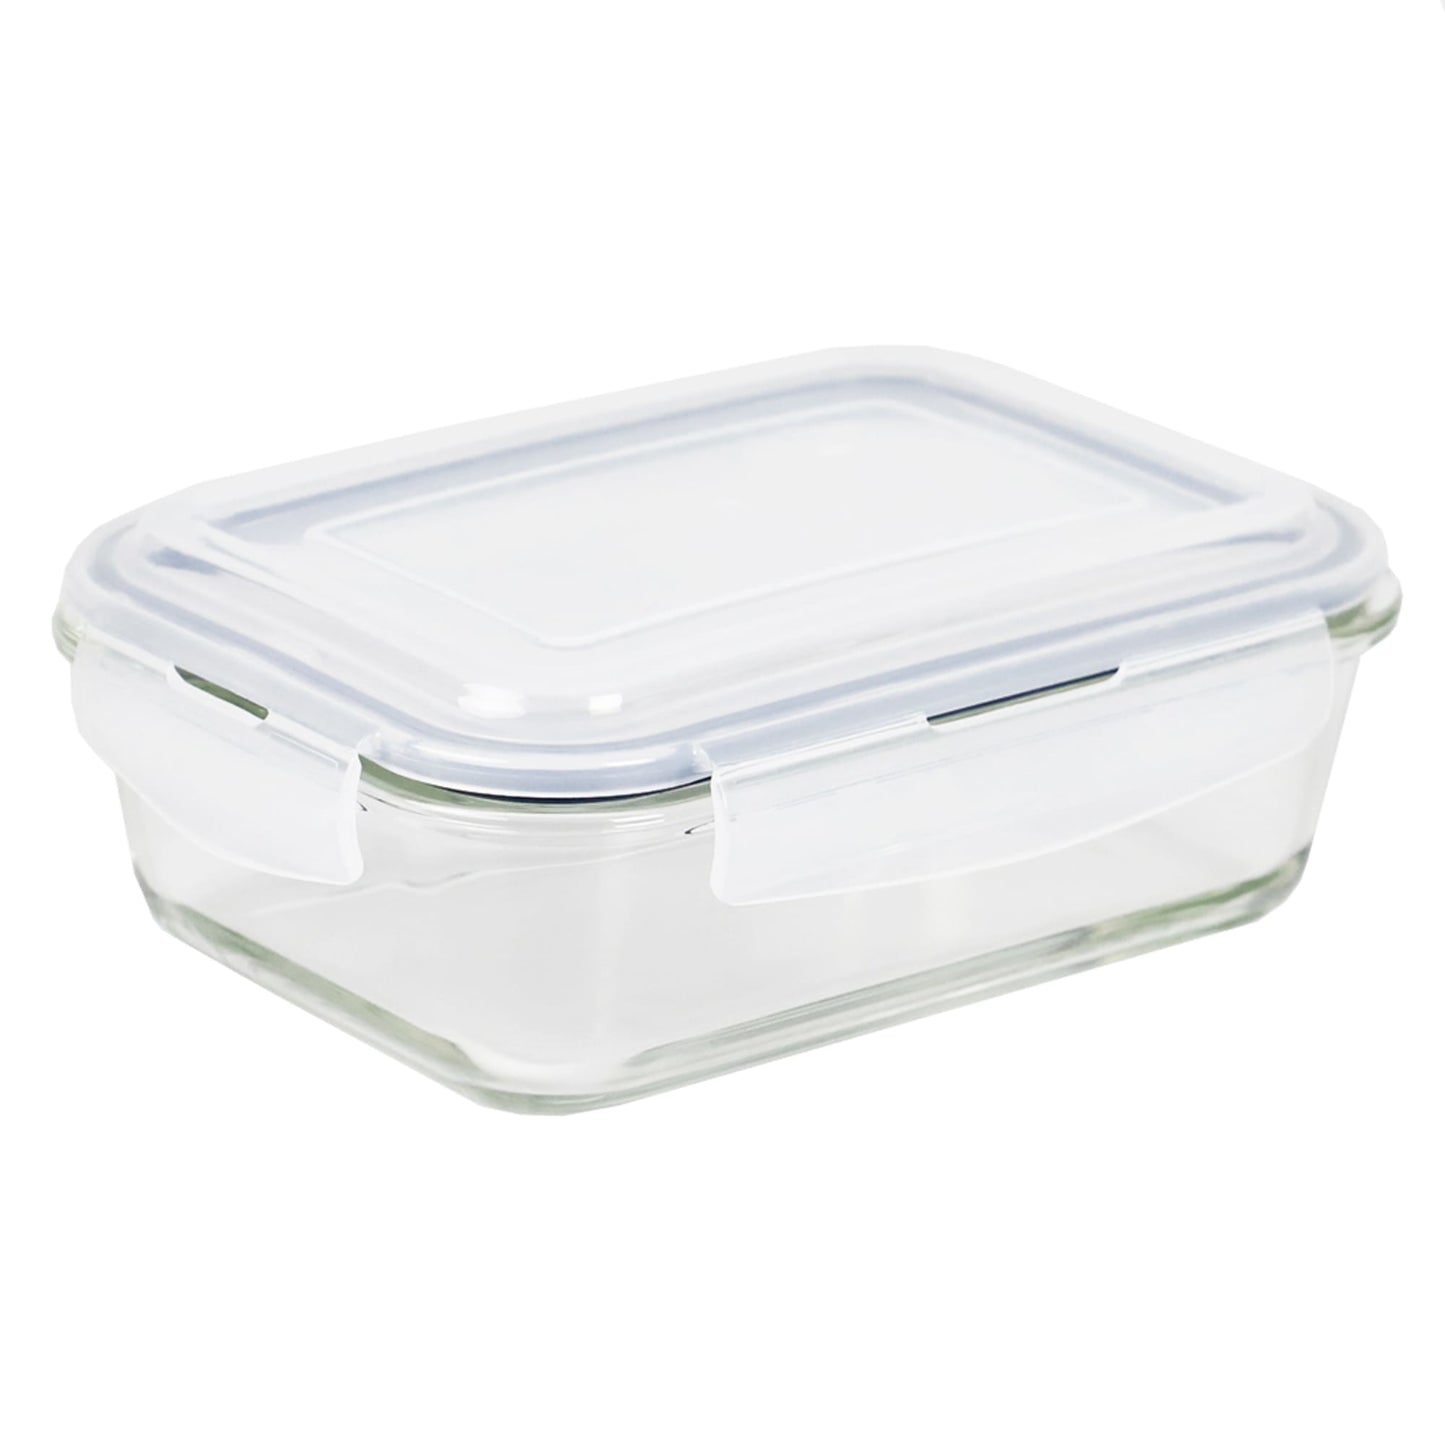 Michael Graves Design 35 Ounce High Borosilicate Glass Rectangle Food Storage Container with Indigo Rubber Seal